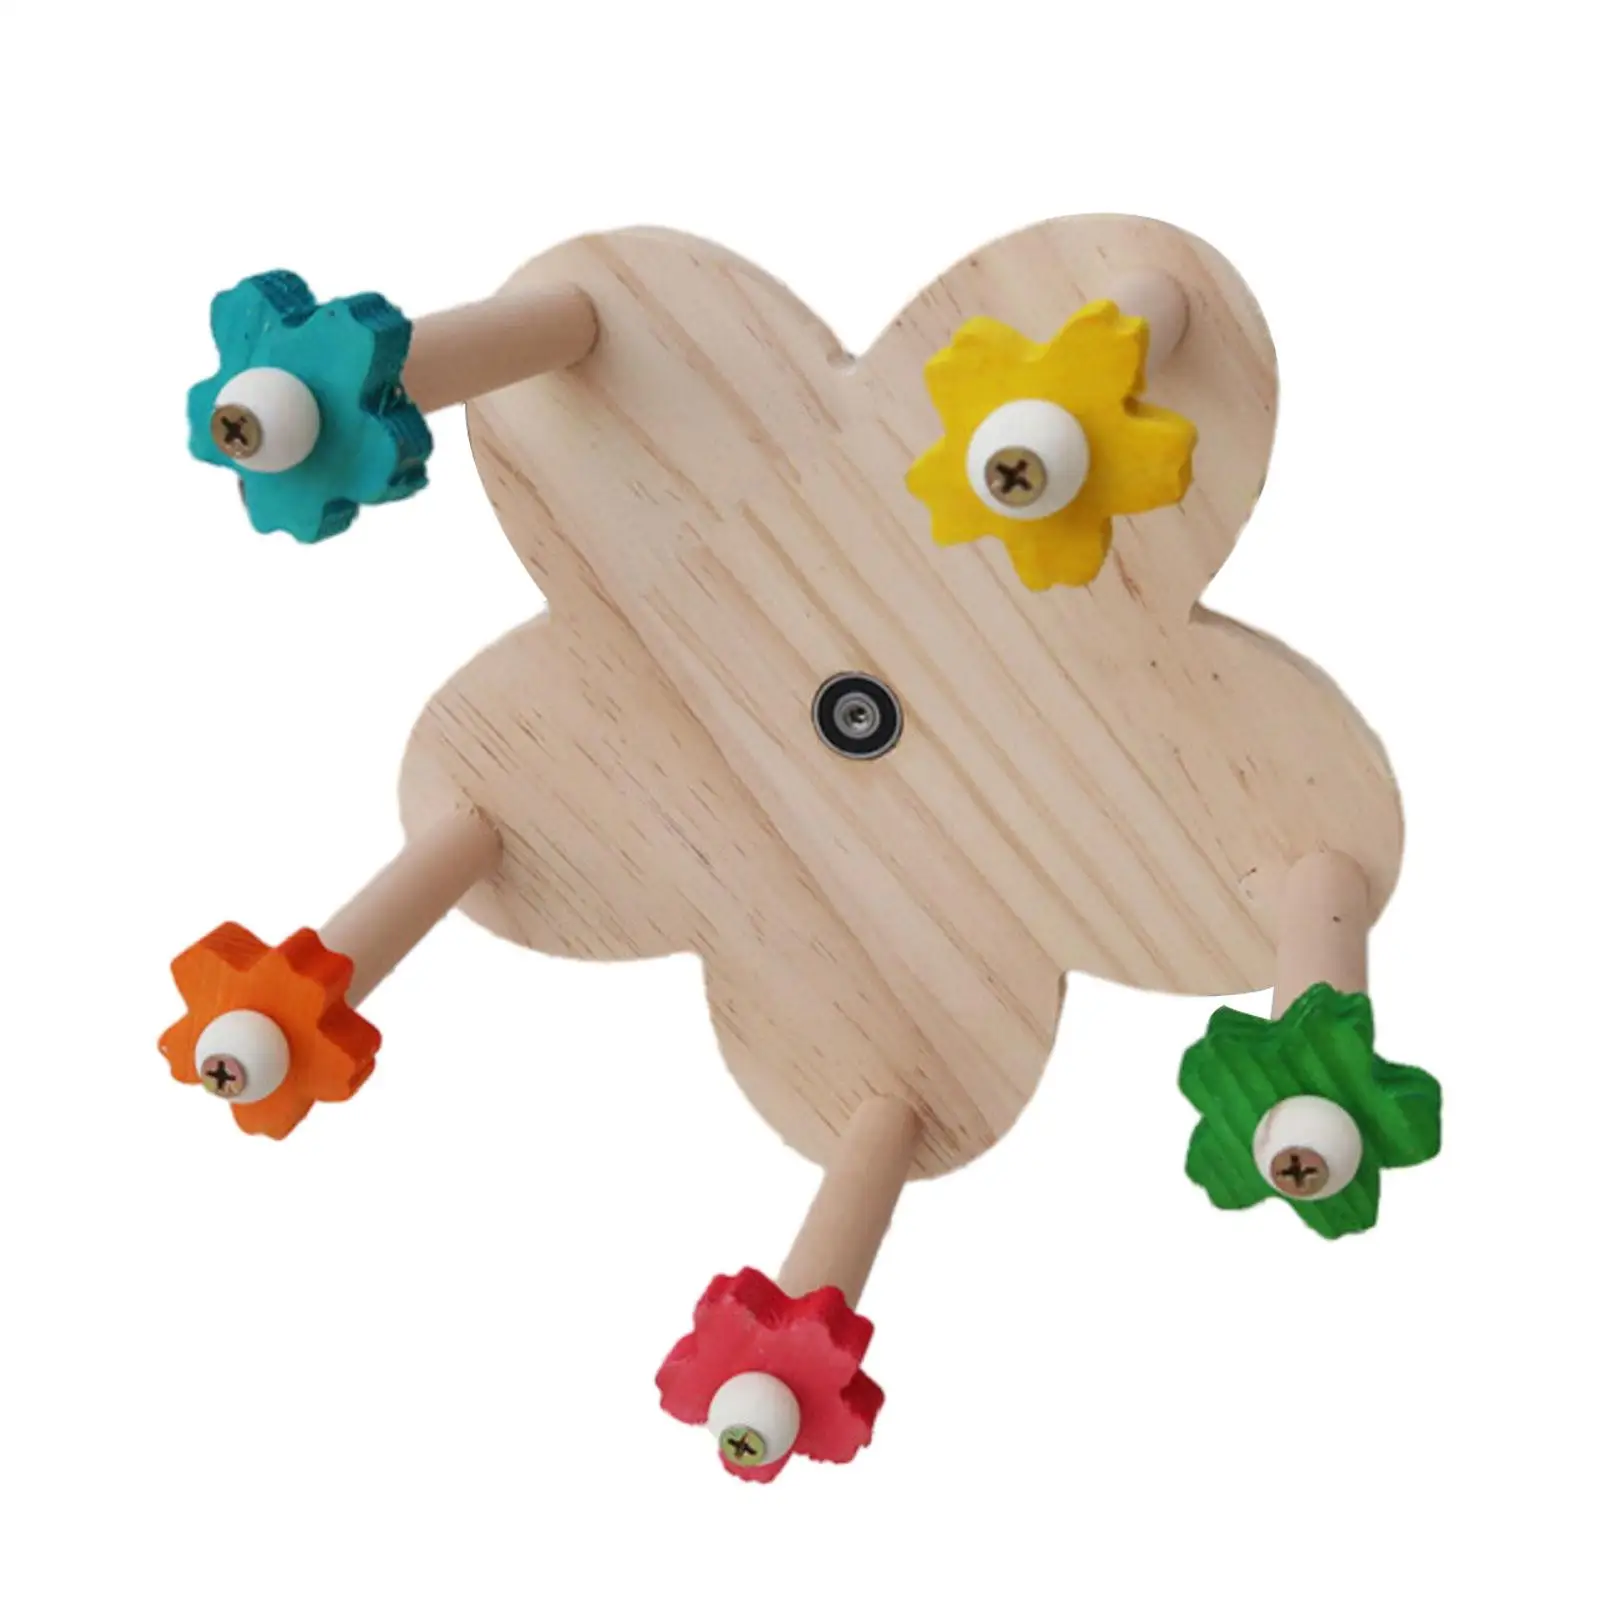 Parrot Perch Wheel Toy 20cm Diameter Wooden Rotating Perches Toys for Macaws Budgies Parakeet Parrot Budgerigar Cockatiels